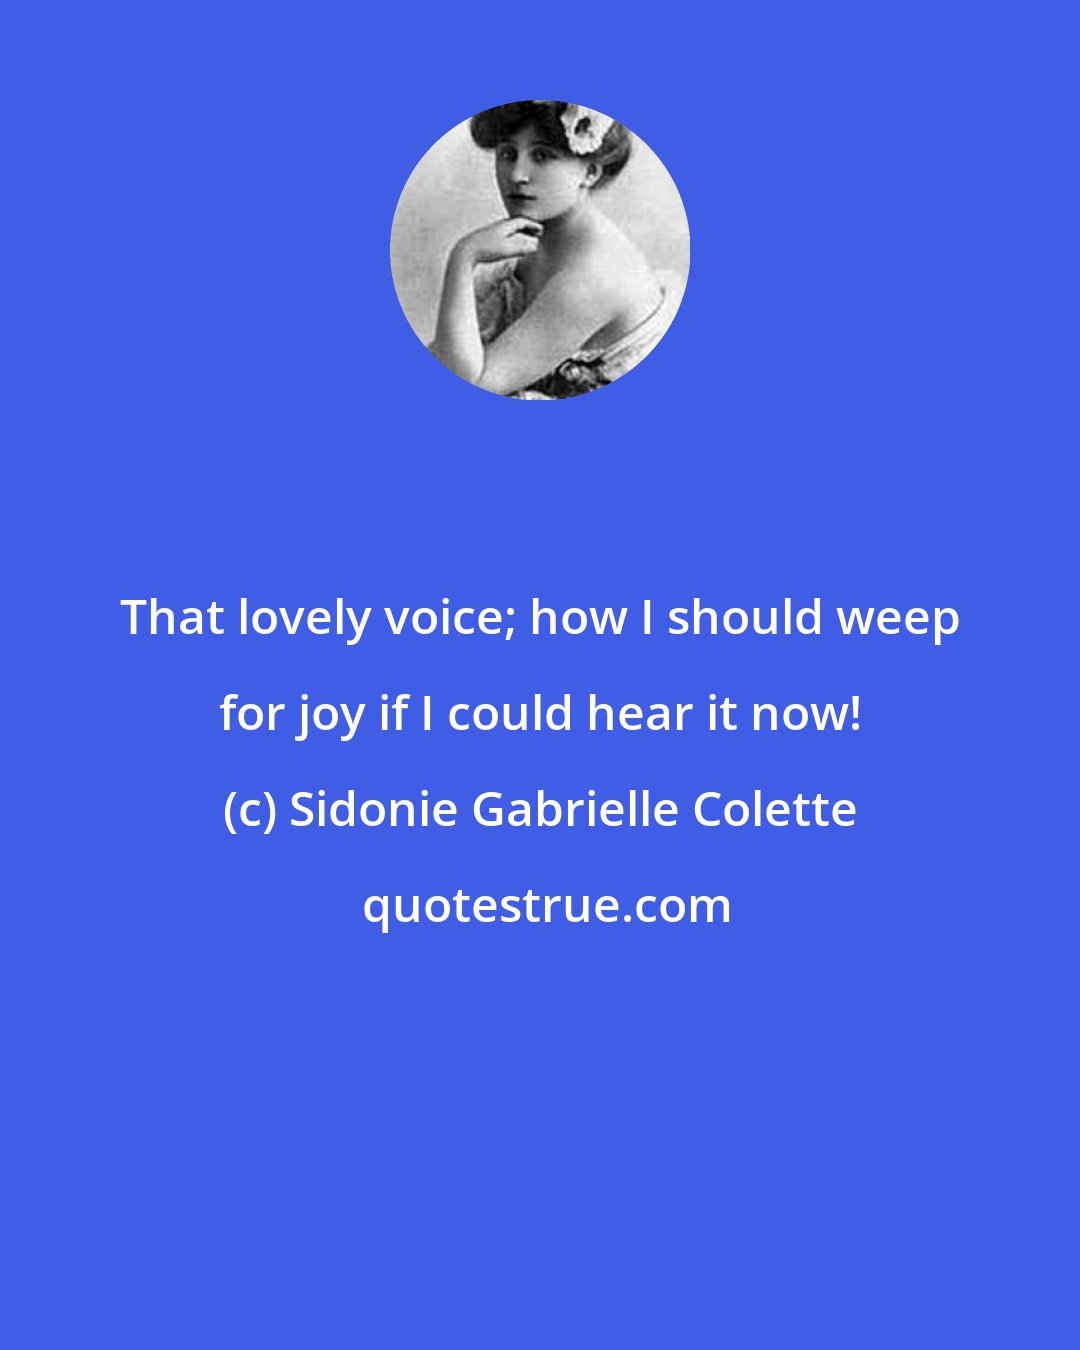 Sidonie Gabrielle Colette: That lovely voice; how I should weep for joy if I could hear it now!